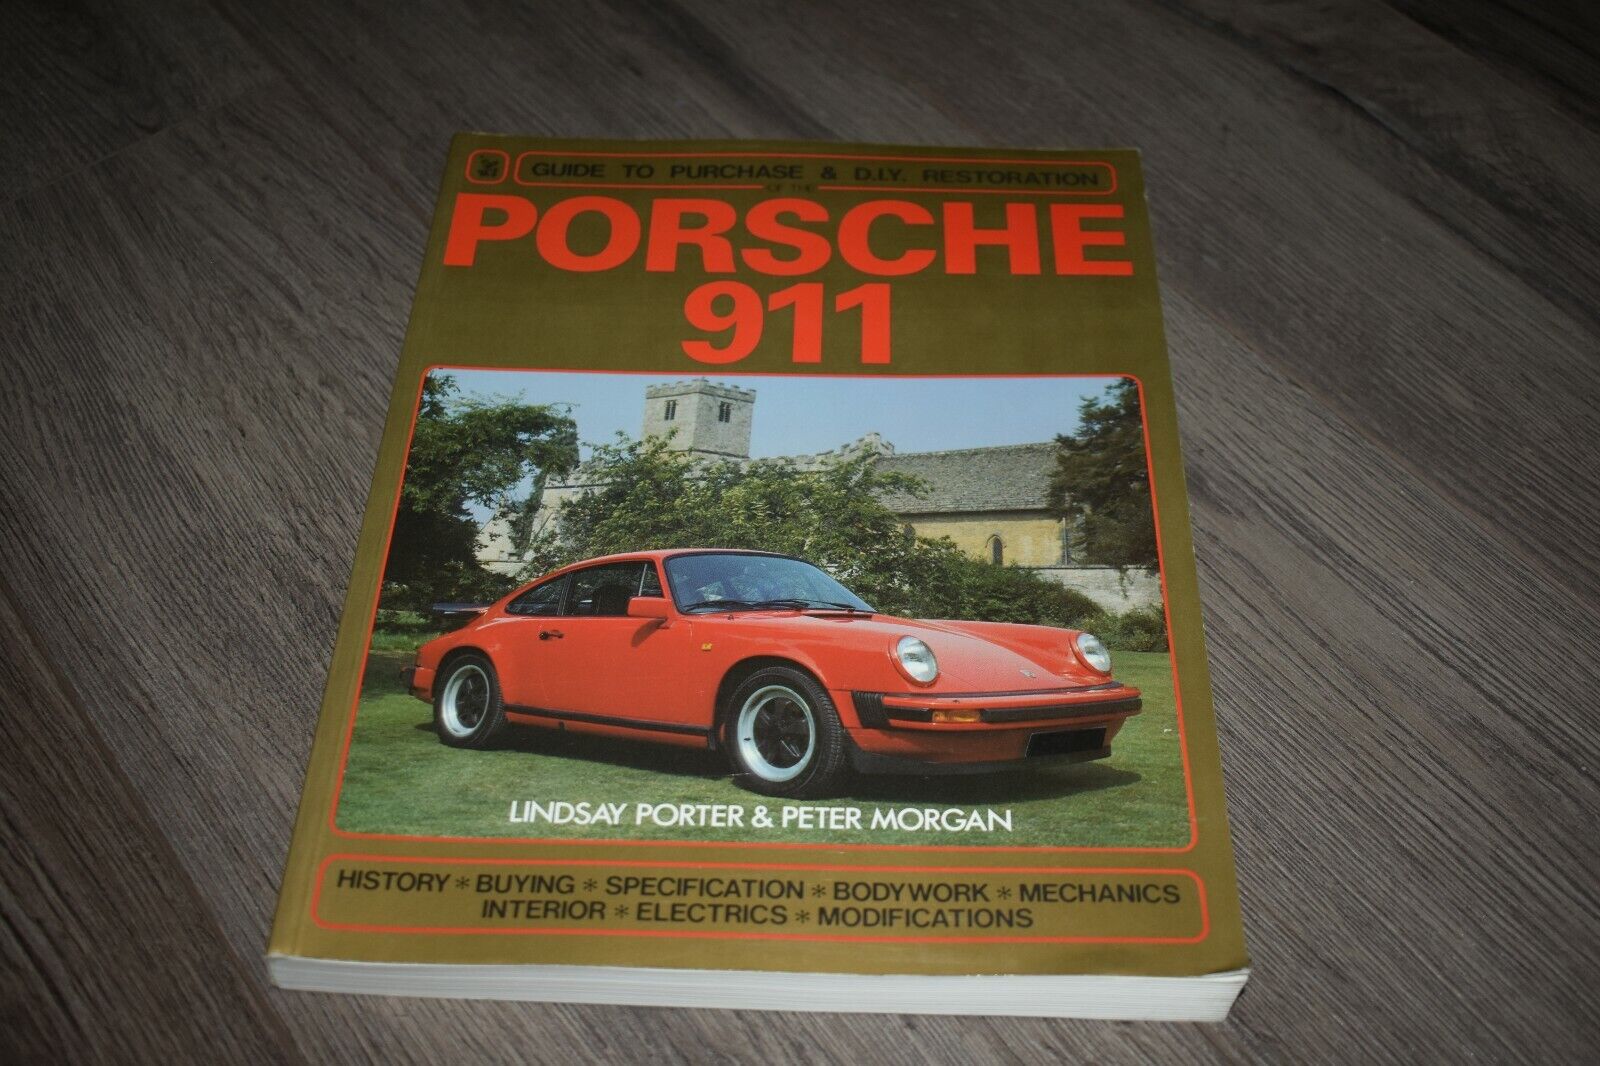 Porsche 911 Guide to Purchase & Do-It-Yourself Restoration by Porter & Morgan 90